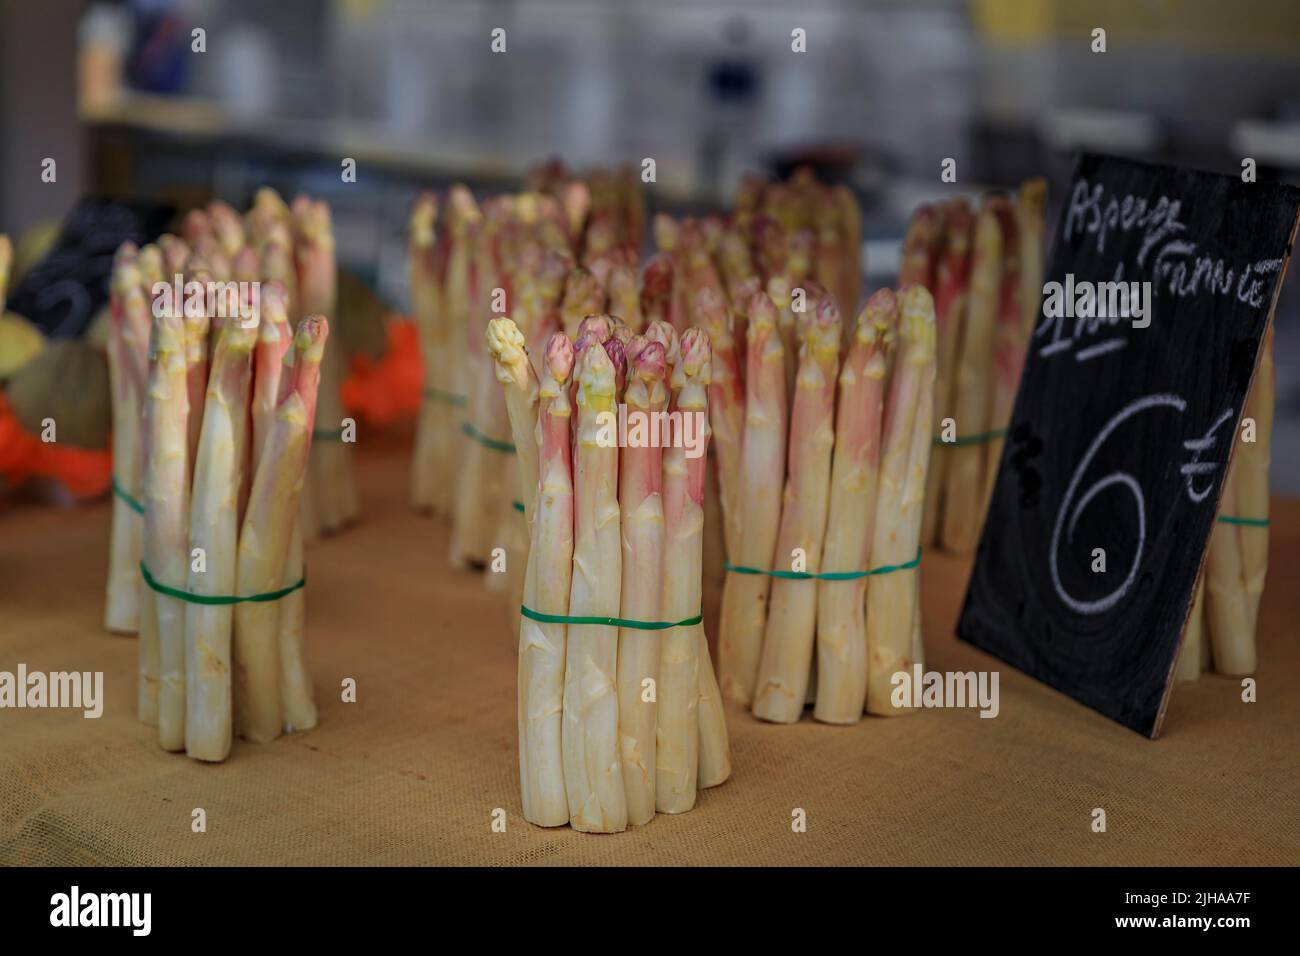 Fresh locally grown white asparagus with a price tag of 6 Euro a kilo at a local farmers market Cours Saleya in the Old Town of Nice, South of France Stock Photo